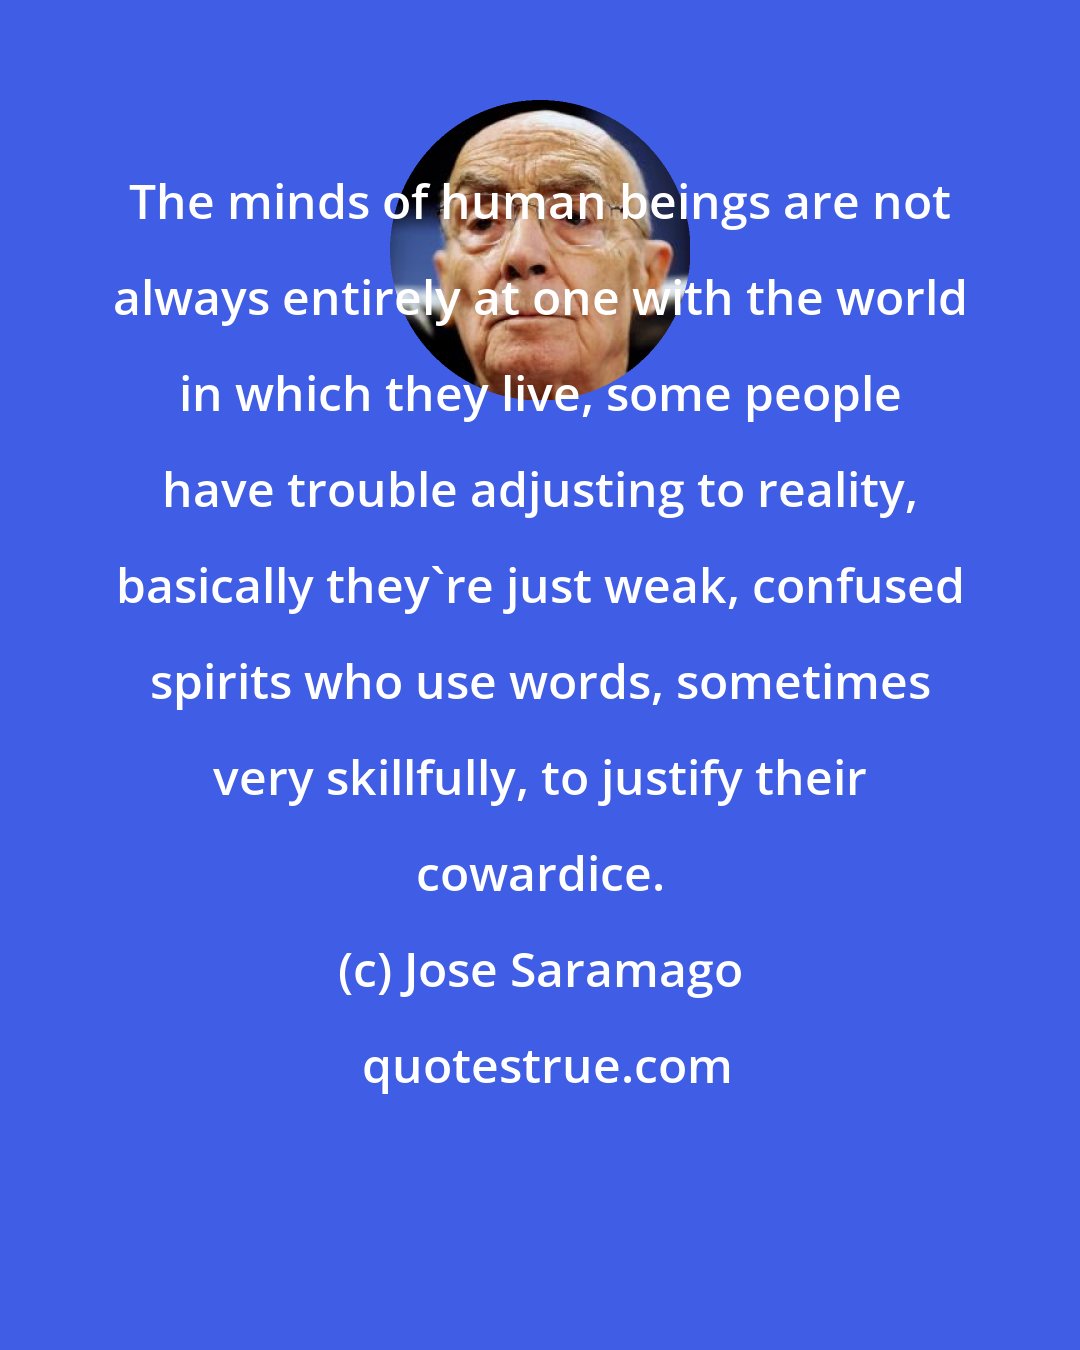 Jose Saramago: The minds of human beings are not always entirely at one with the world in which they live, some people have trouble adjusting to reality, basically they're just weak, confused spirits who use words, sometimes very skillfully, to justify their cowardice.